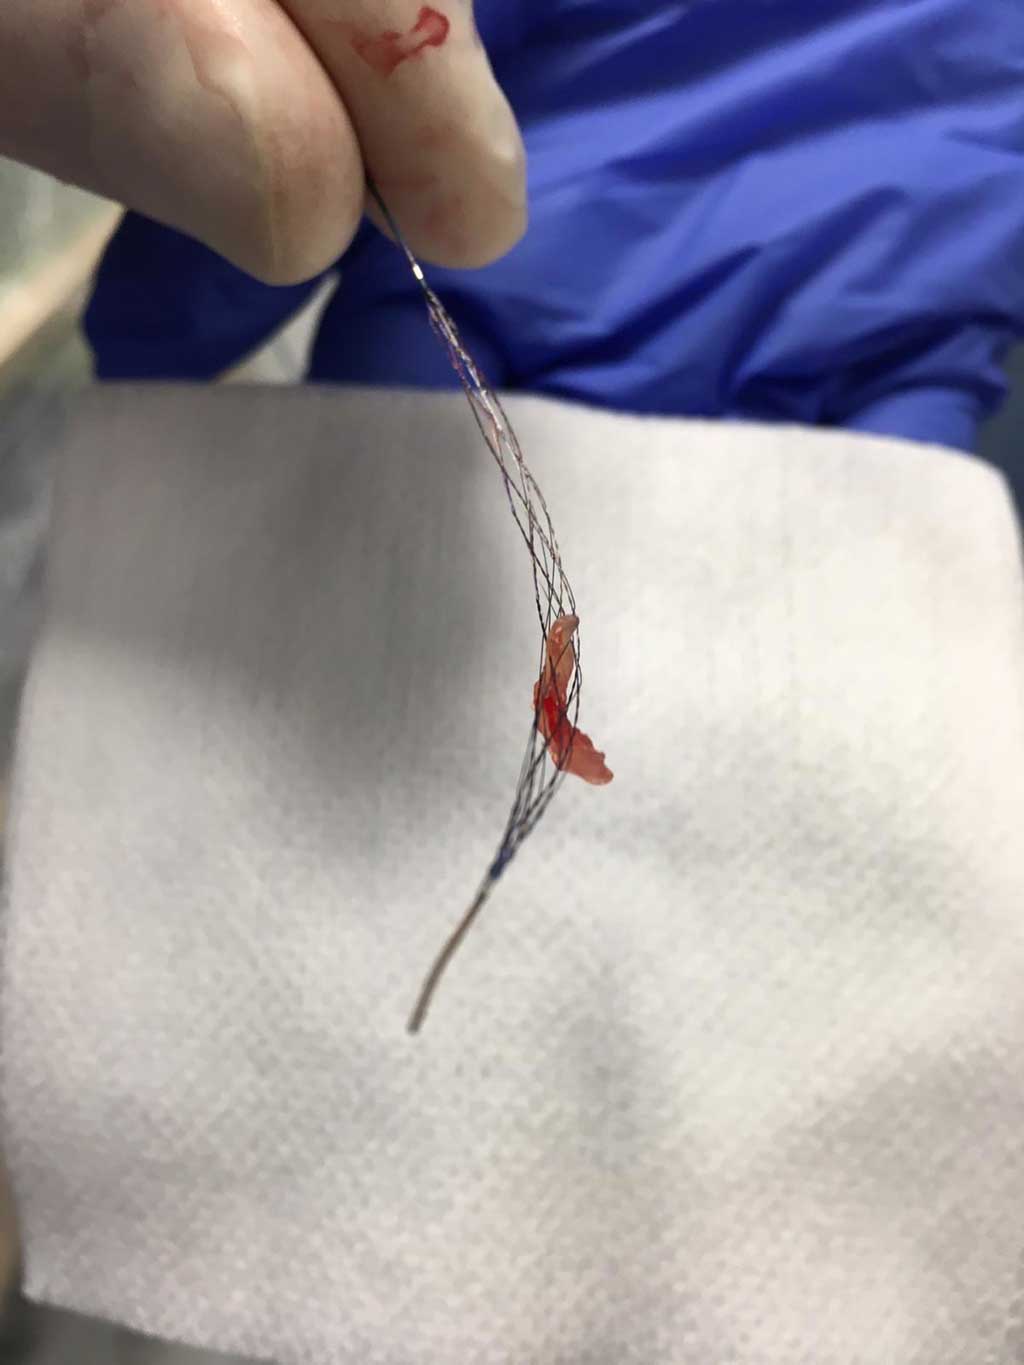 : Clot removed with Tigertriever XL at Bochum University Hospital (Photo courtesy of Rapid Medical)